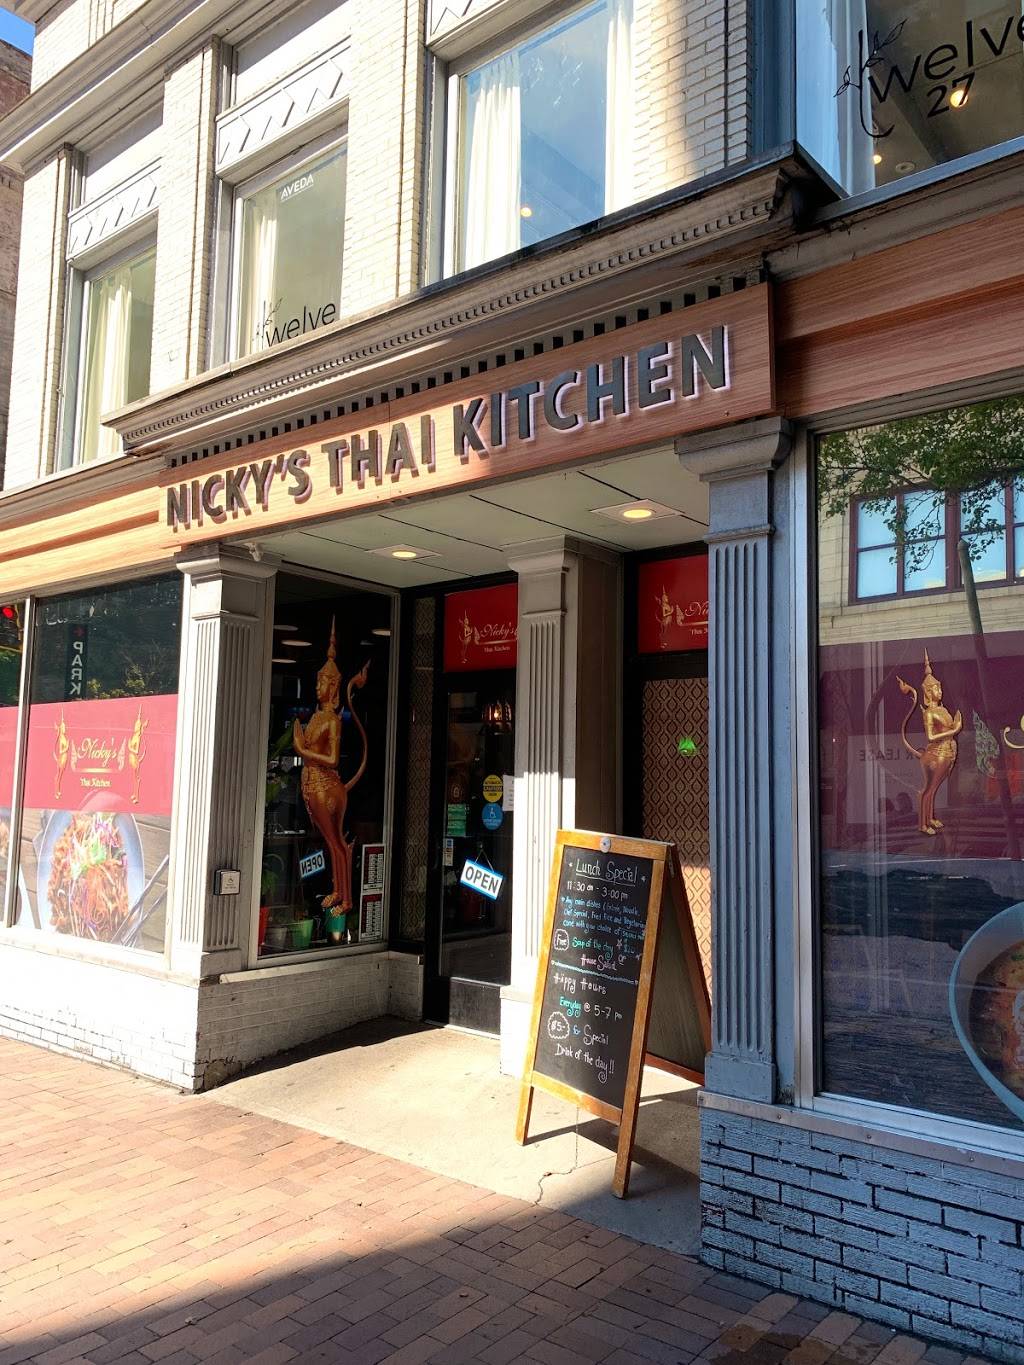 5a68345e2828c390d9c55d22629f8513  United States Pennsylvania Allegheny County Pittsburgh Nickys Thai Kitchen 412 471 8424htm 